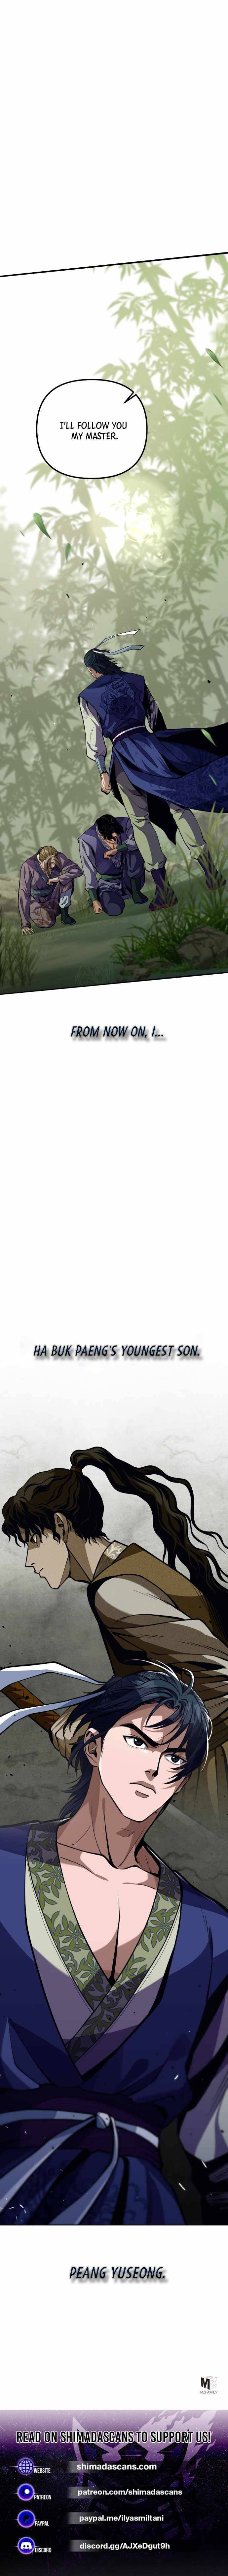 Ha Buk Paeng’s youngest son Chapter 1 - Page 26